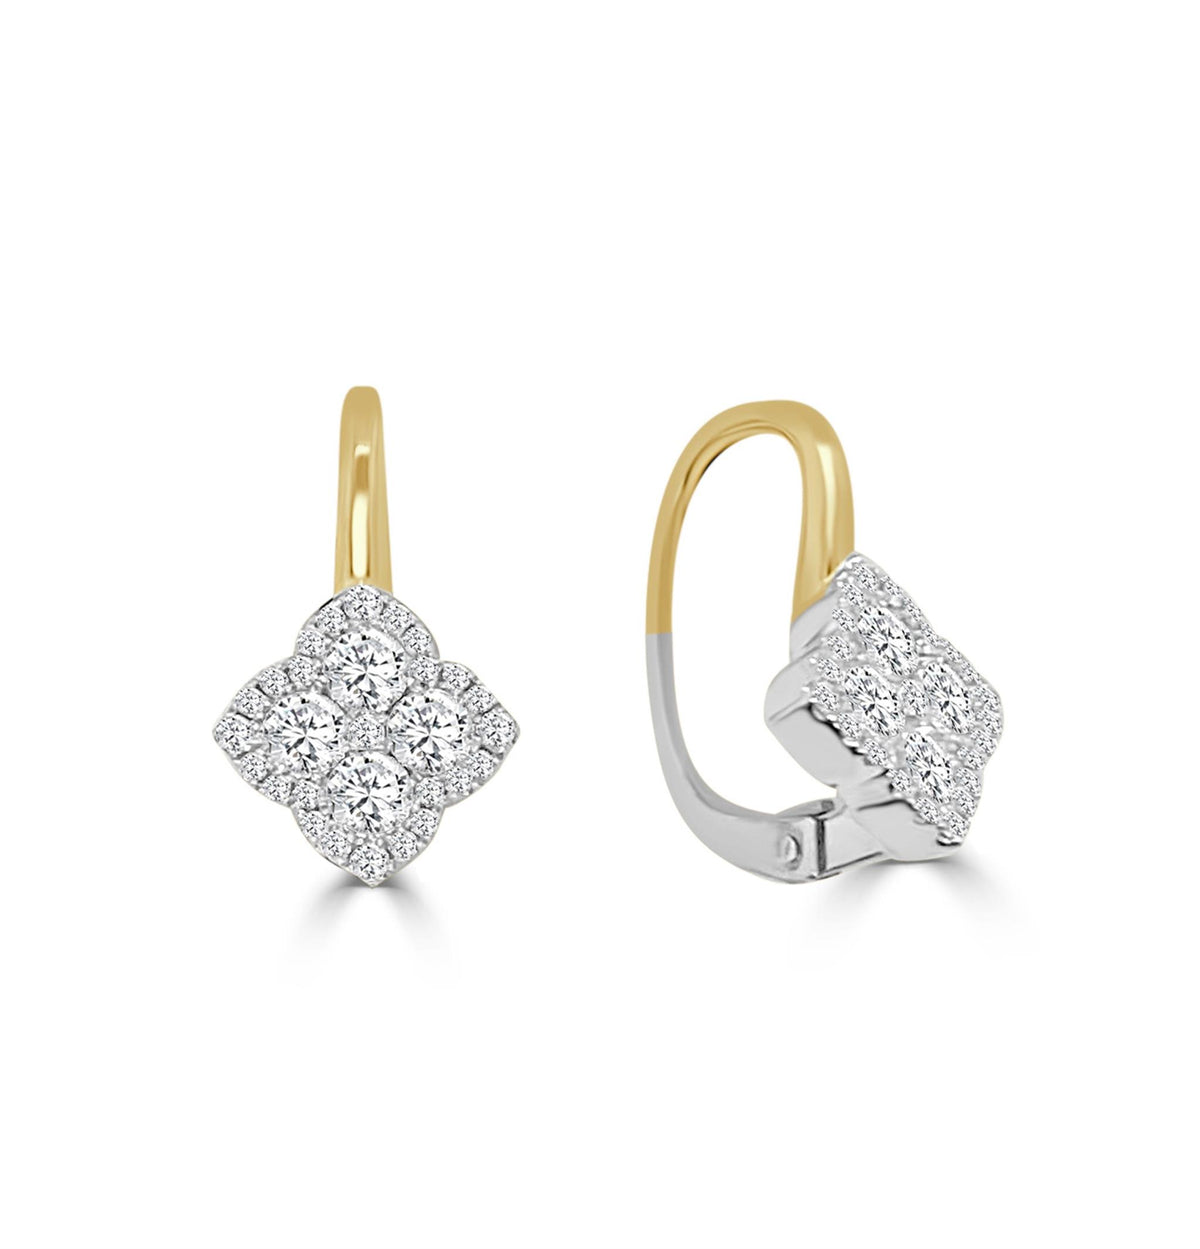 Frederic Sage 14Kt Yellow & White Gold Leverback Earrings with .72 cttw Natural Diamonds